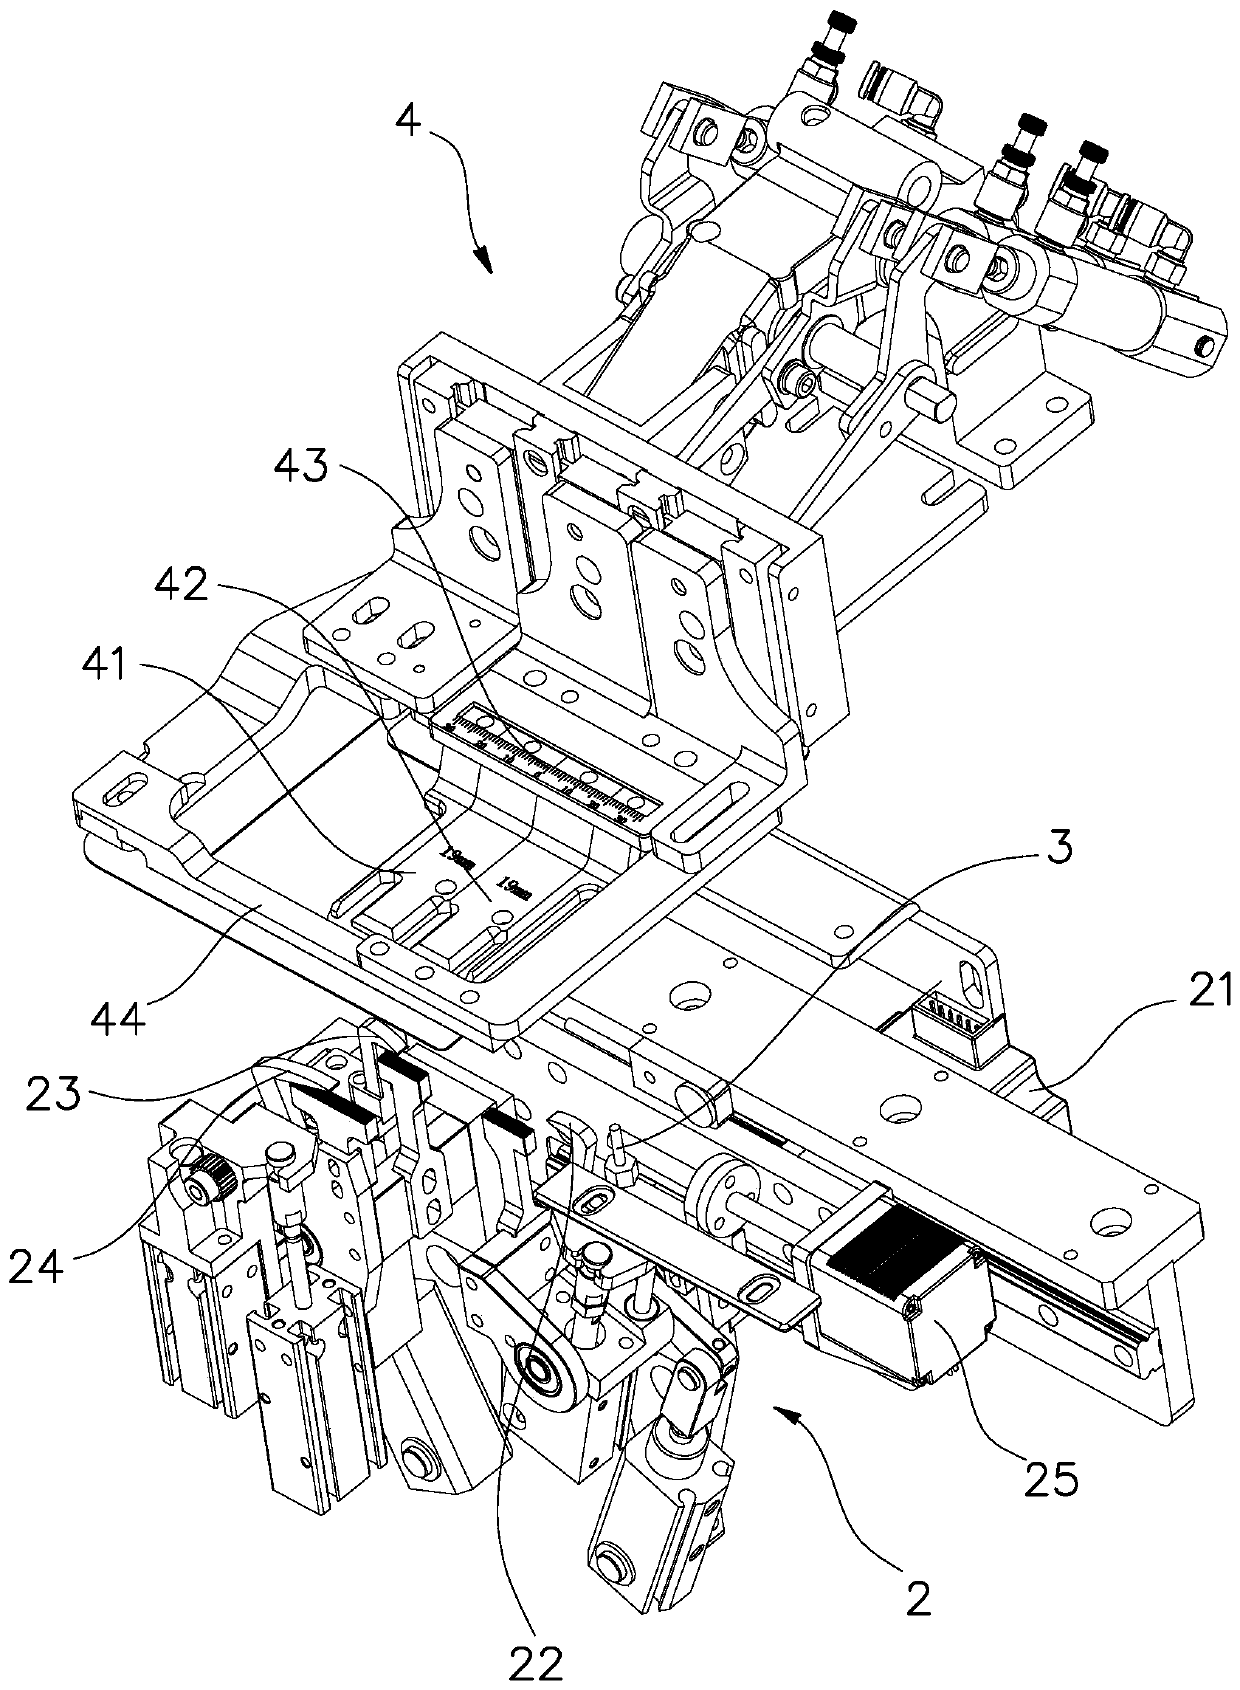 Clasp travel control device and control method of bra clasp machine